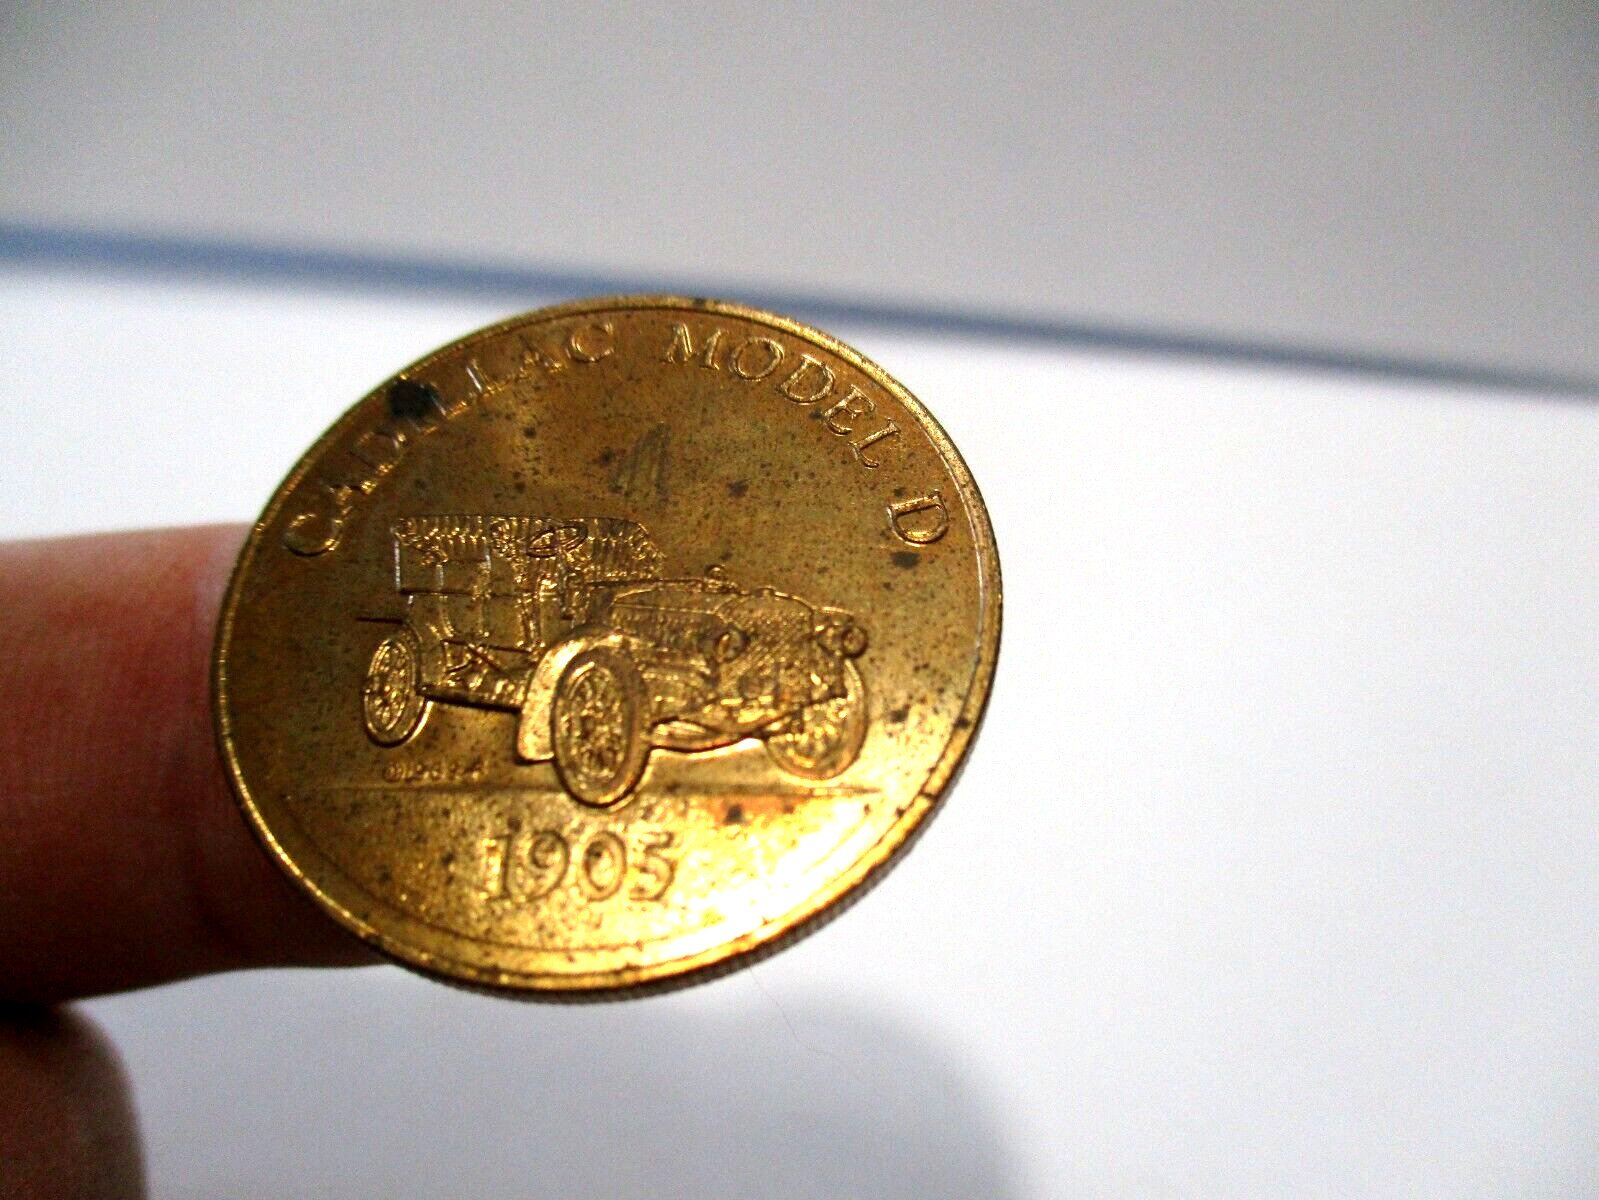 Cadillac Model D 1905 BRASS TOKEN 1969F DATED 1.16 INCH